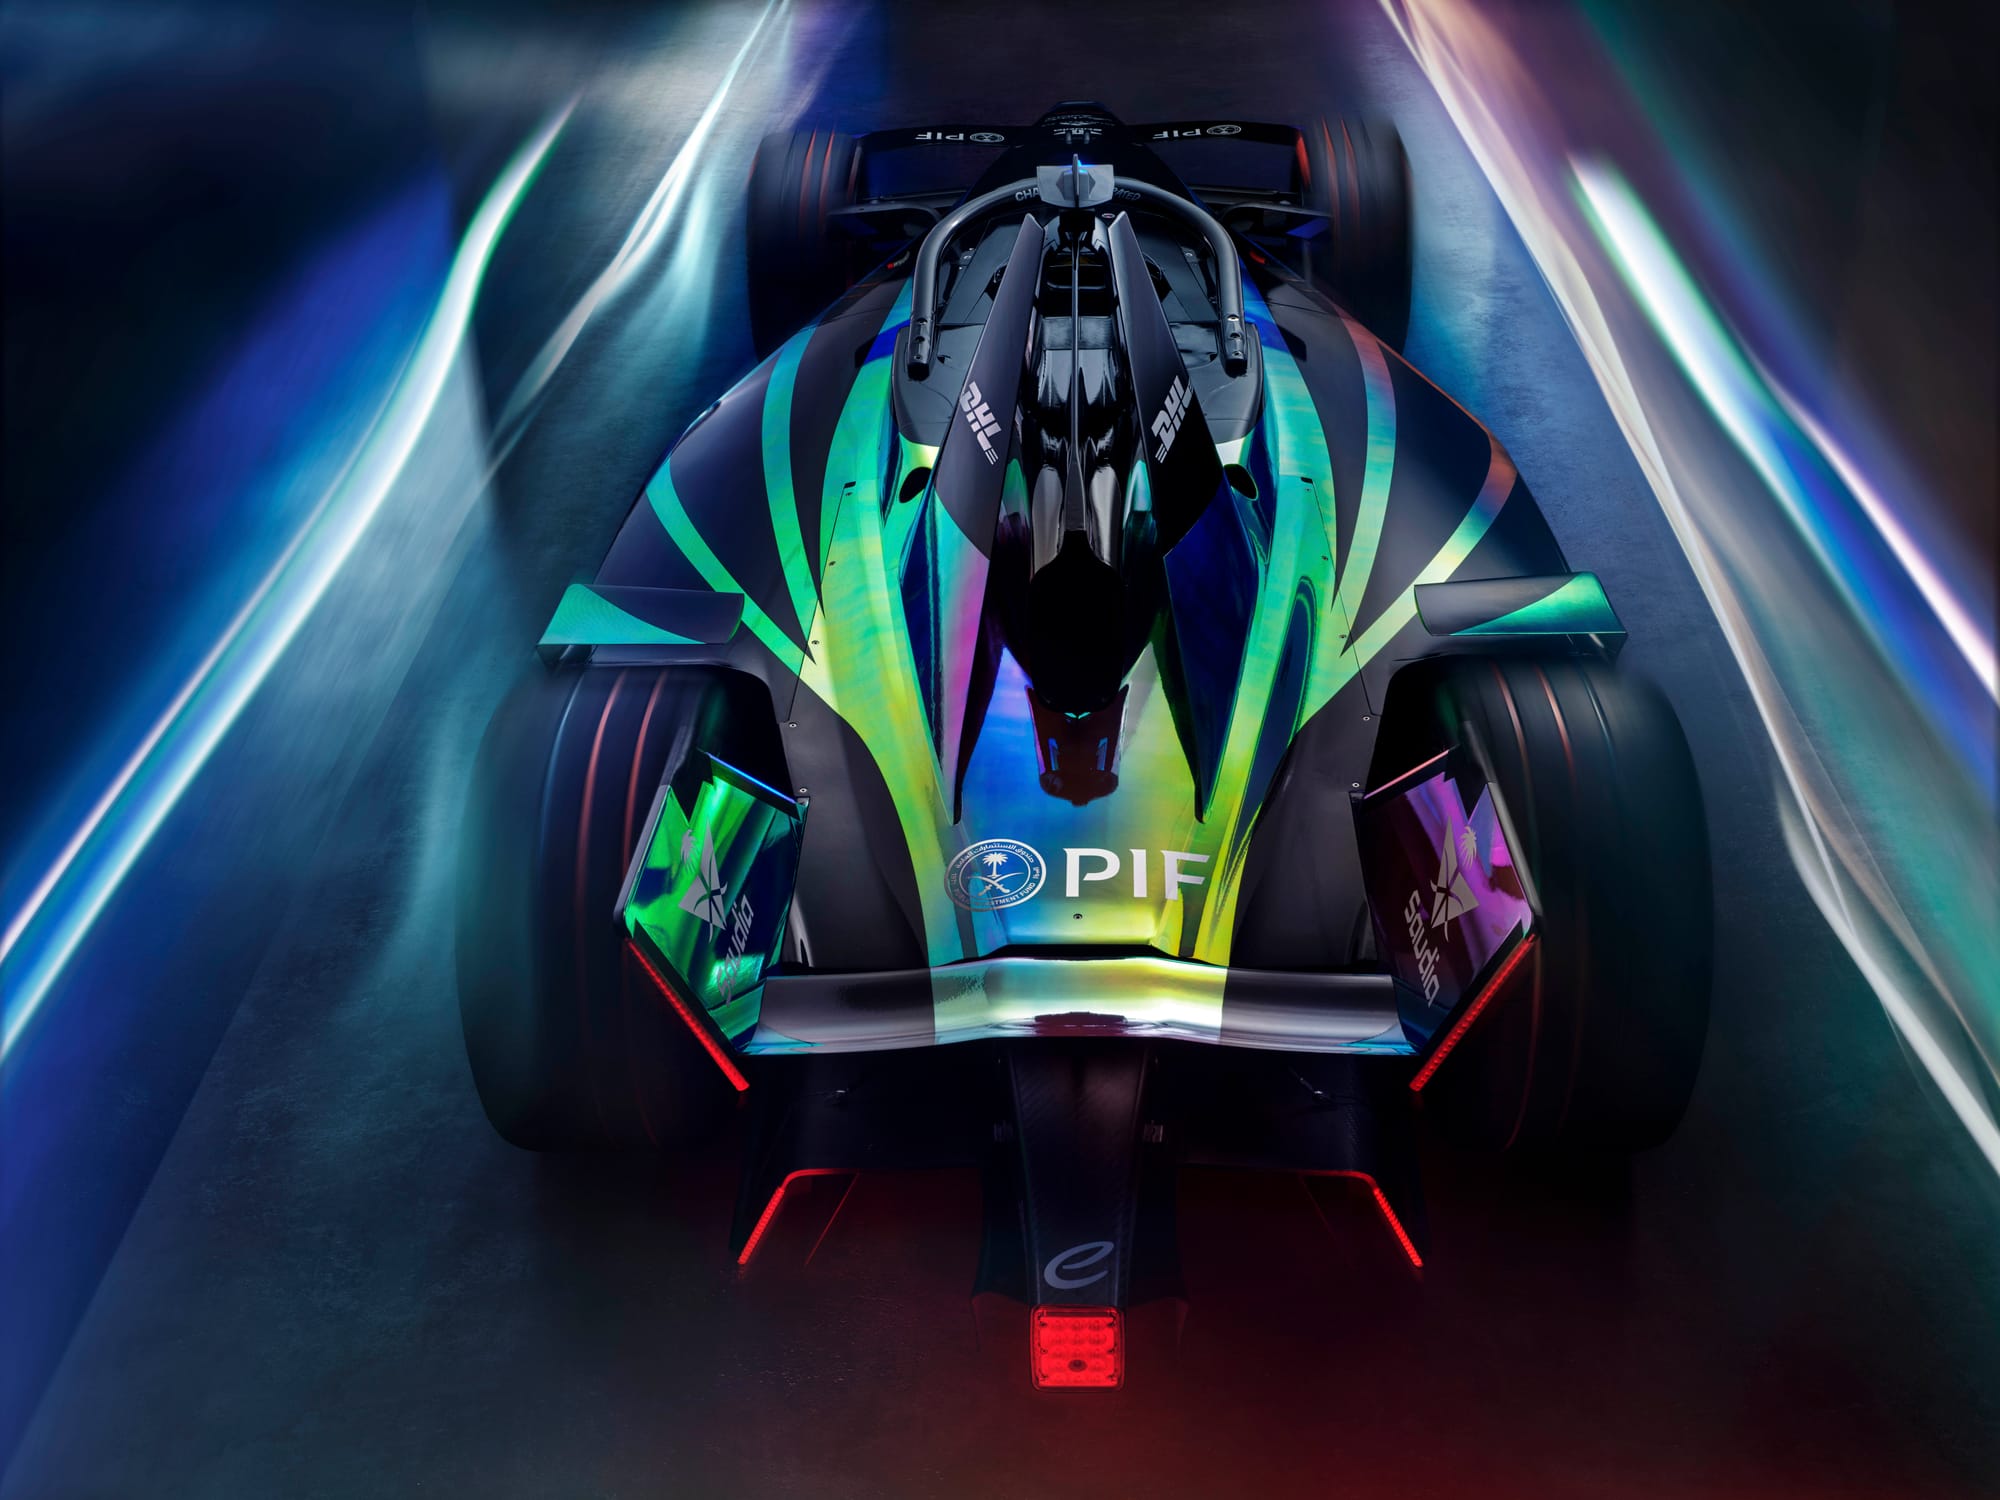 Everything you need to know about Formula E's new Gen3 Evo car